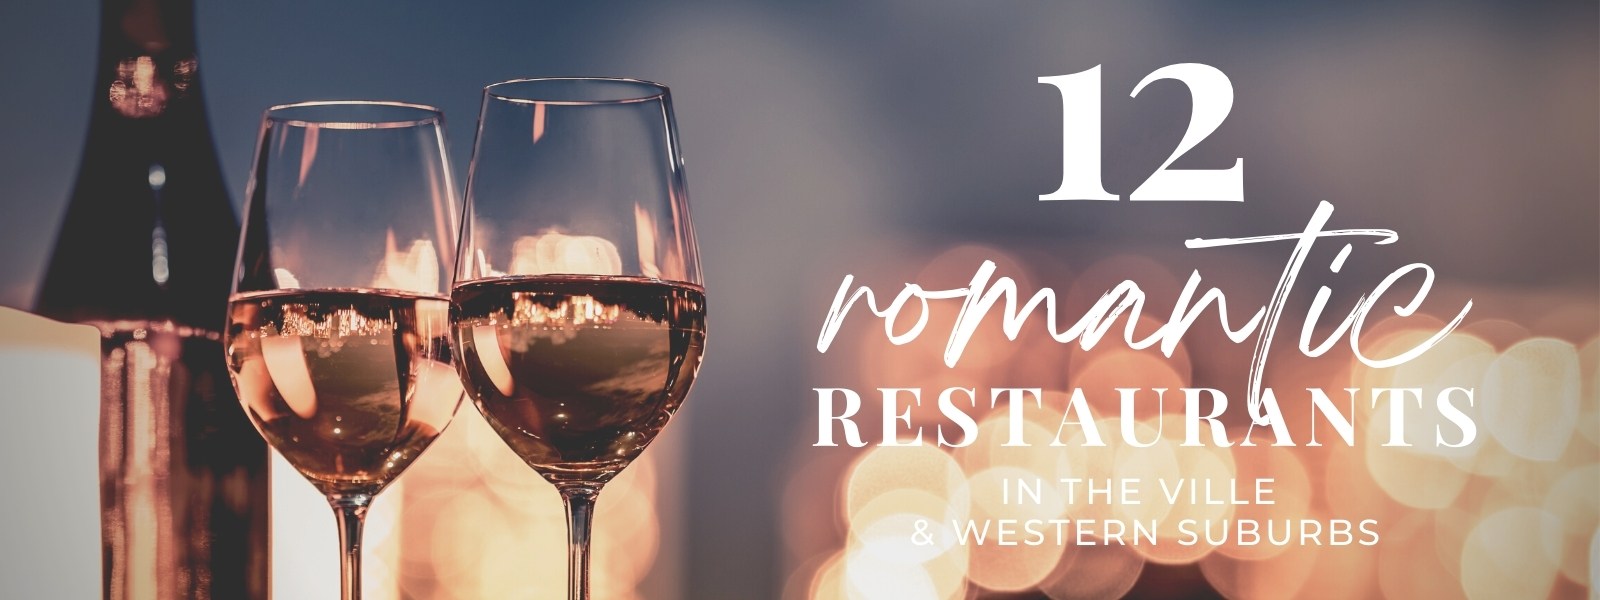 Bottle of wine and 2 glasses | 12 Romantic Restaurants in Naperville and the Western Chicago Suburbs | Lemont | Wheaton | Bolingbrook | Plainfield